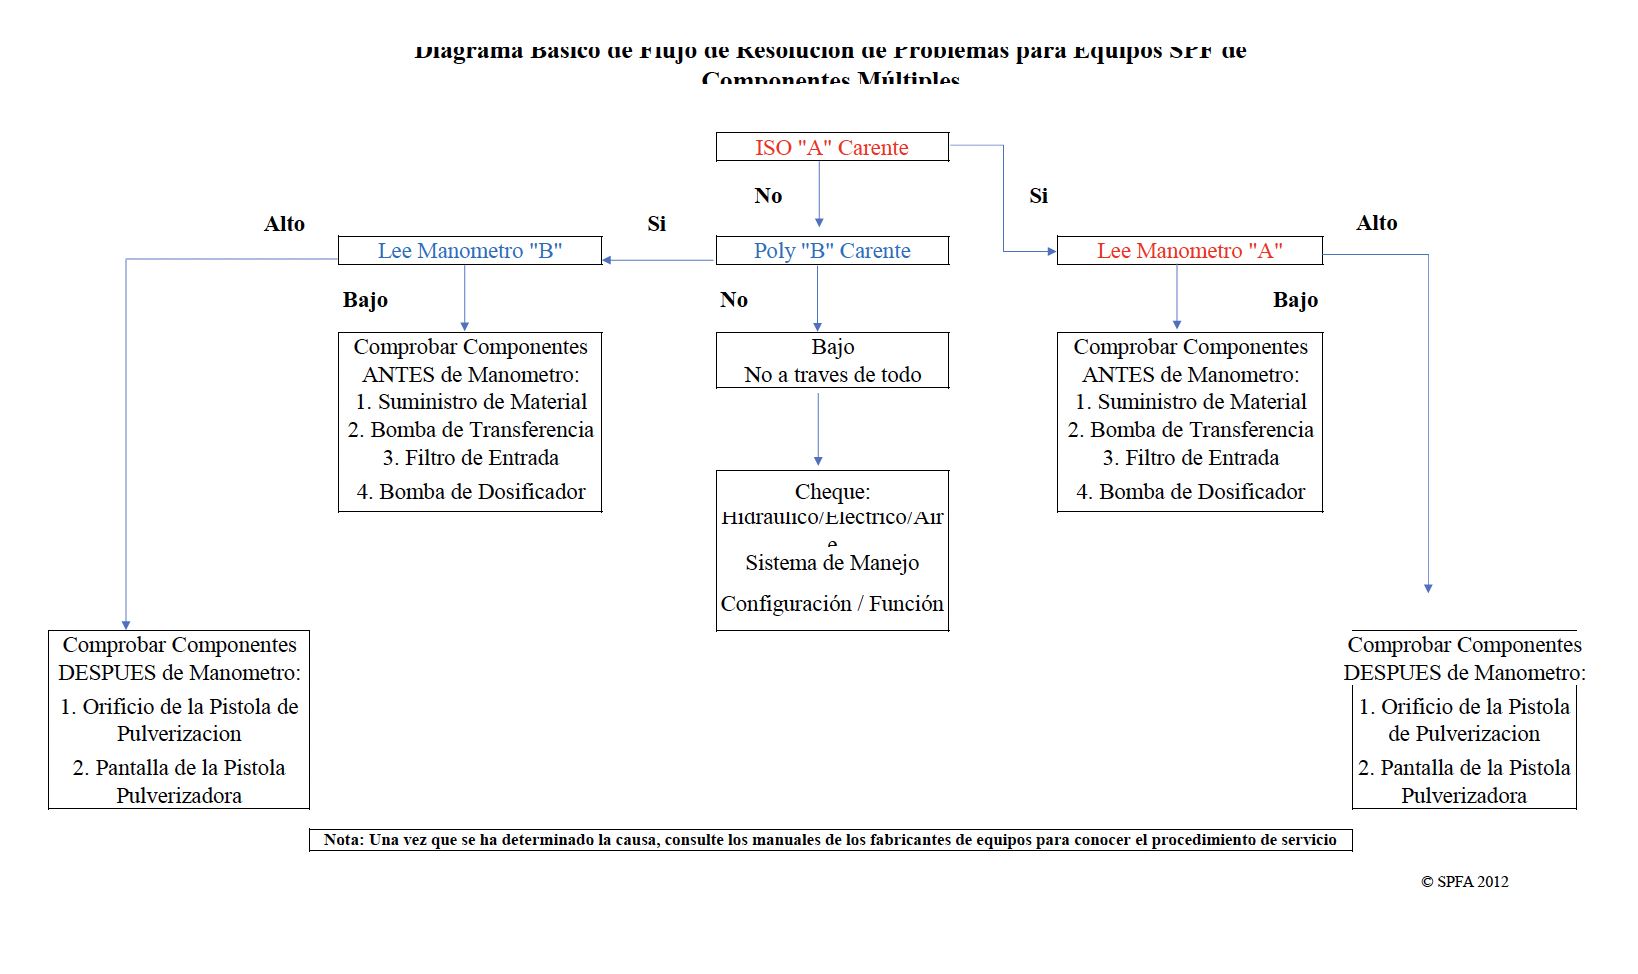 Basic Trouble Shooting Flow Chart for Plural Component SPF Equipment - Spanish